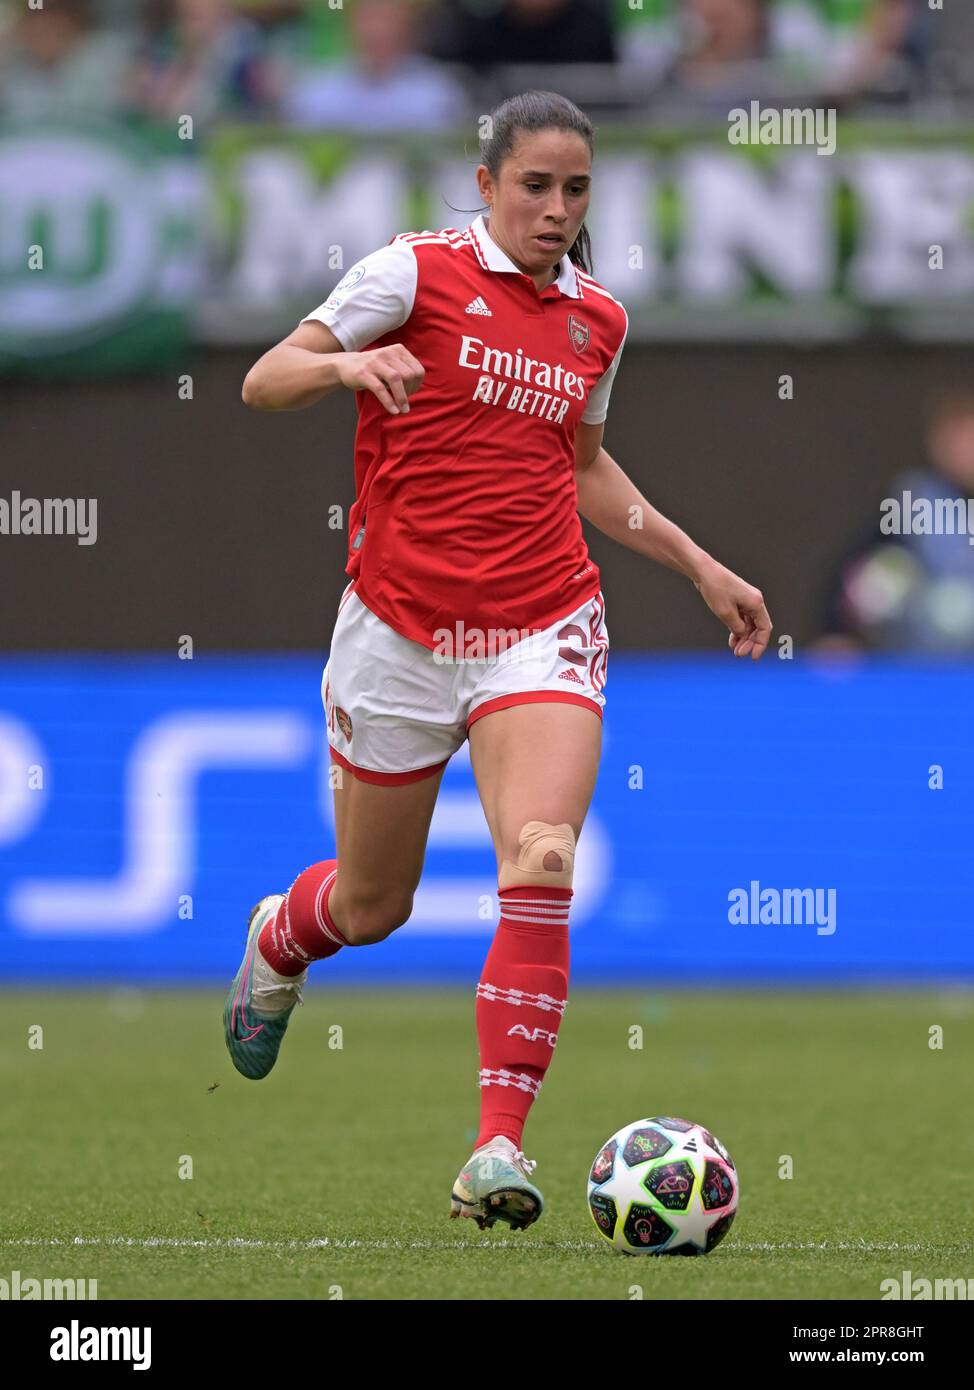 WOLFSBURG - Rafaelle Souza of Arsenal WFC during the UEFA Champions League Women's Semifinal match between VFL Wolfsburg and Arsenal WFC at VFL Wolfsburg Arena on April 23, 2023 in Wolfsburg, Germany. AP | Dutch Height | GERRIT OF COLOGNE Stock Photo